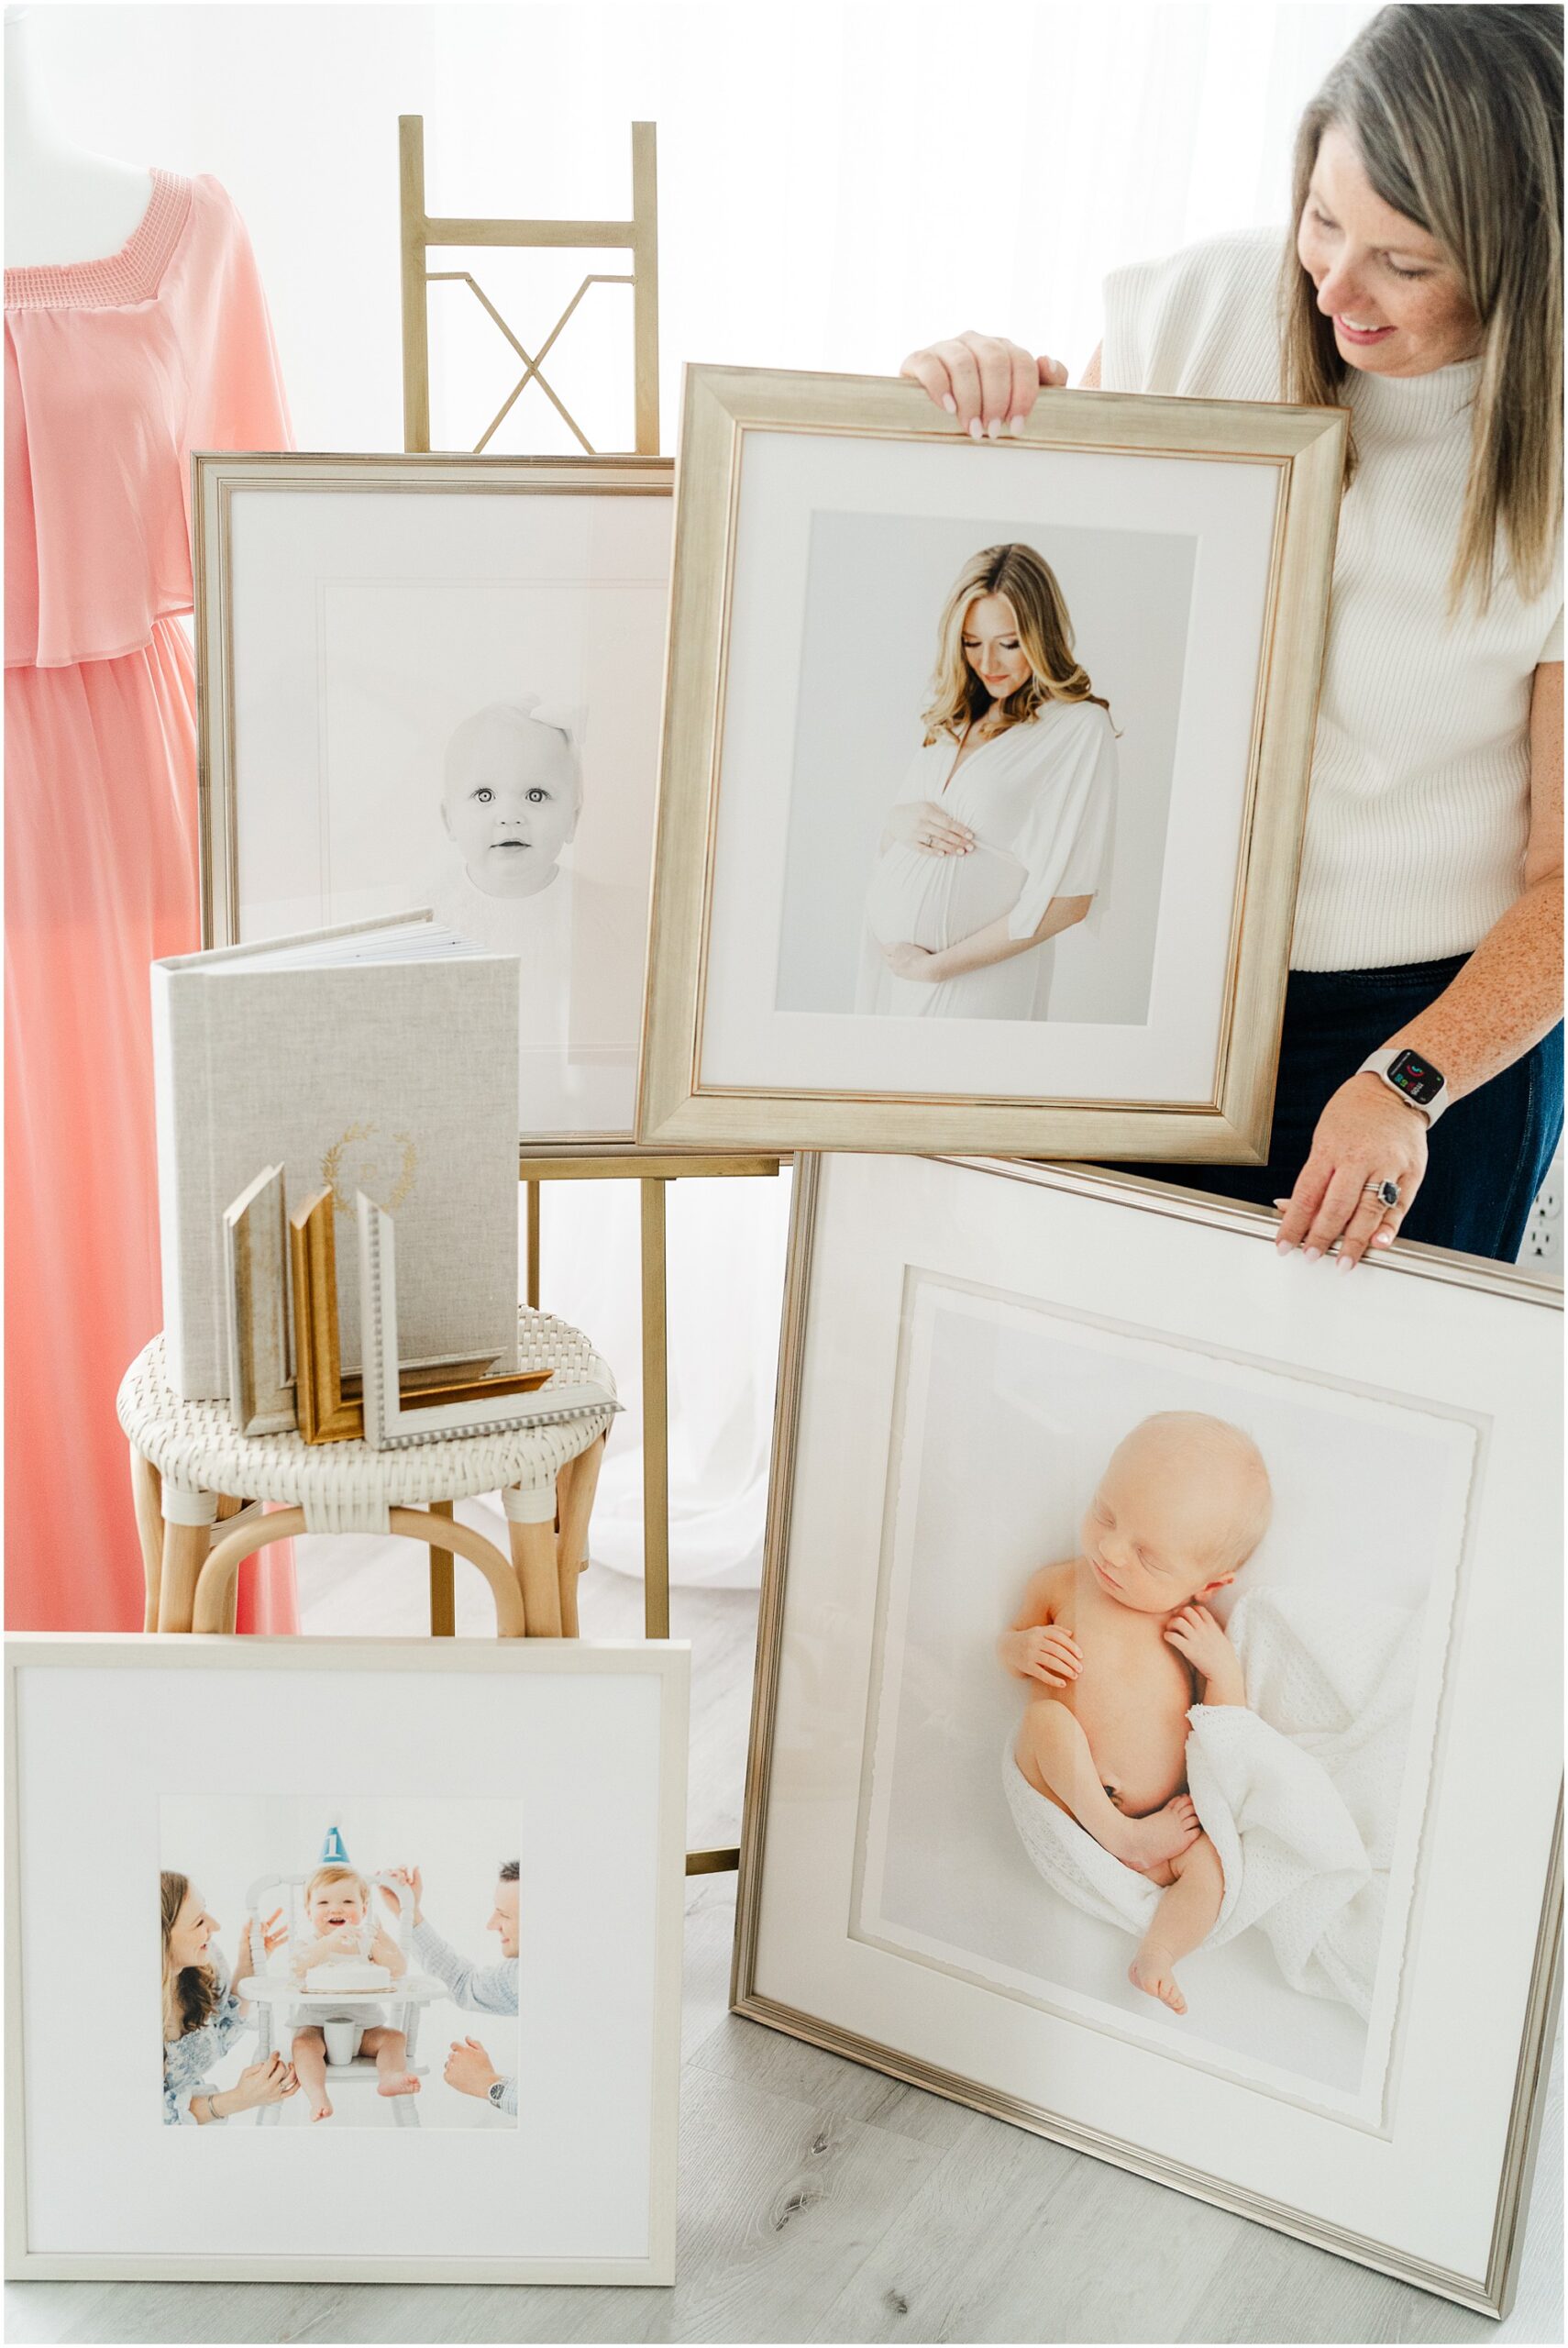 Atlanta photographer poses with custom framing of her client portraits.